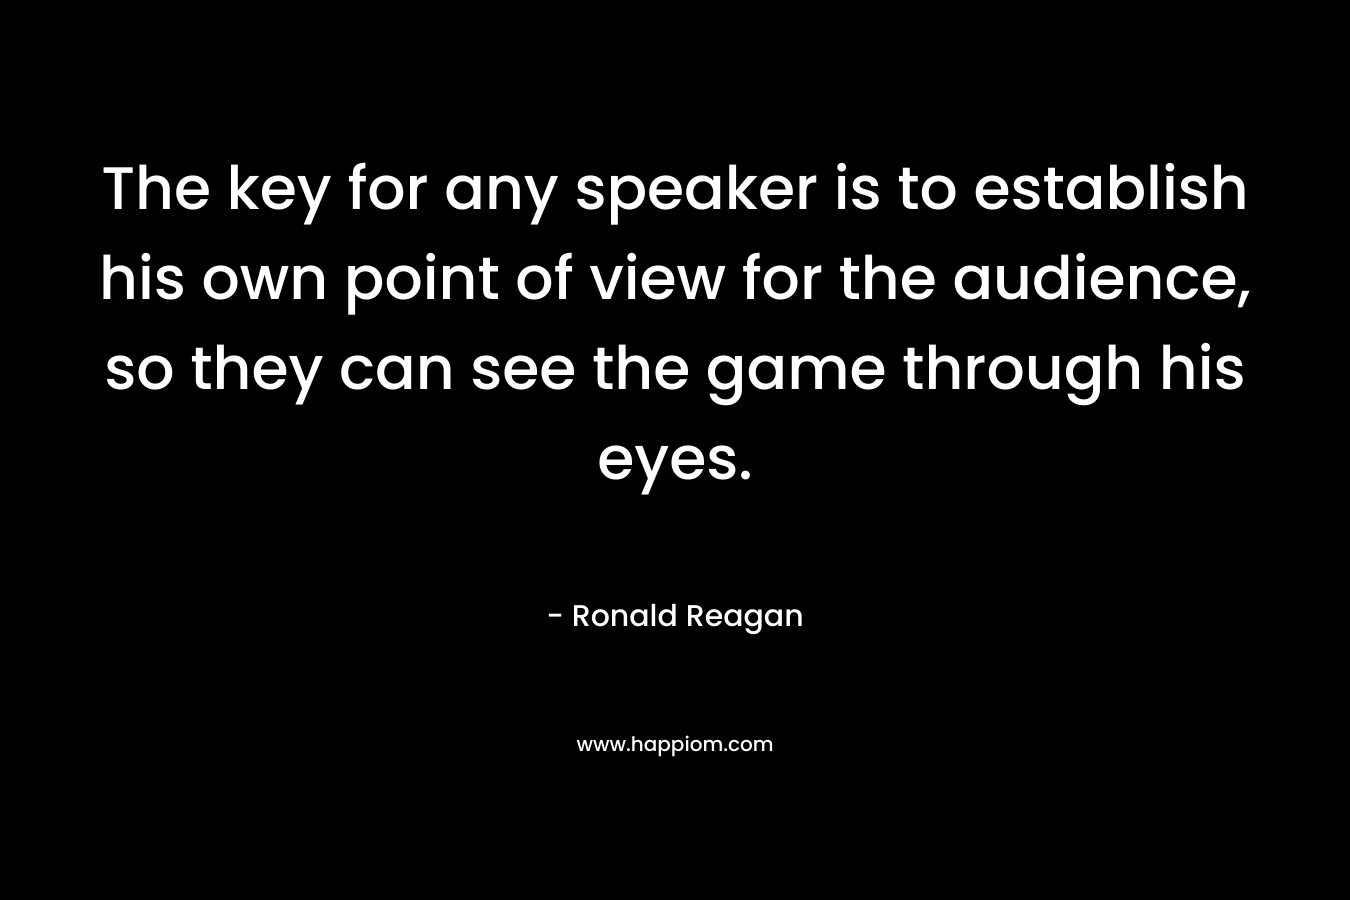 The key for any speaker is to establish his own point of view for the audience, so they can see the game through his eyes. – Ronald Reagan